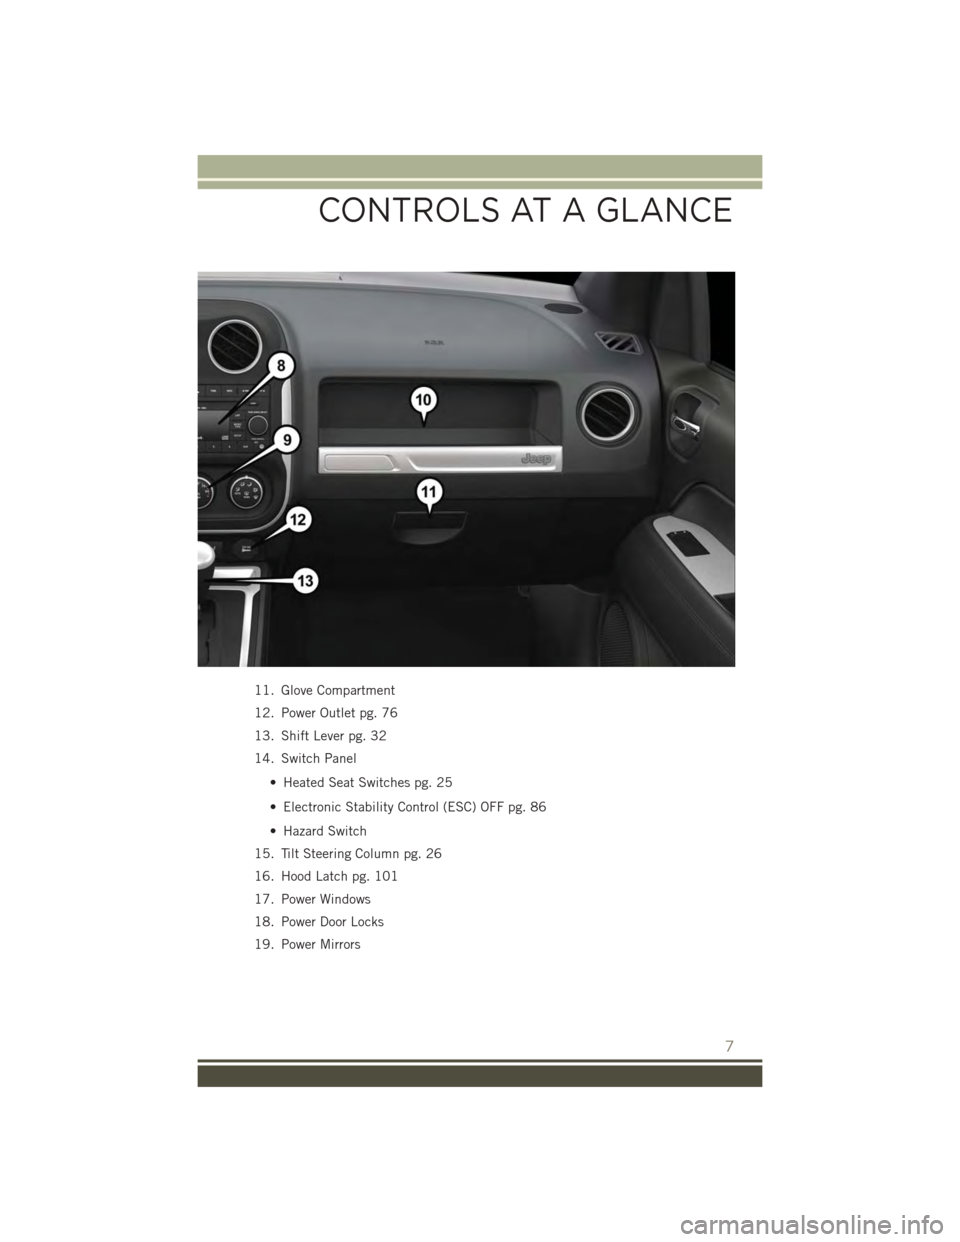 JEEP PATRIOT 2015 1.G User Guide 11. Glove Compartment
12. Power Outlet pg. 76
13. Shift Lever pg. 32
14. Switch Panel
• Heated Seat Switches pg. 25
• Electronic Stability Control (ESC) OFF pg. 86
• Hazard Switch
15. Tilt Steer